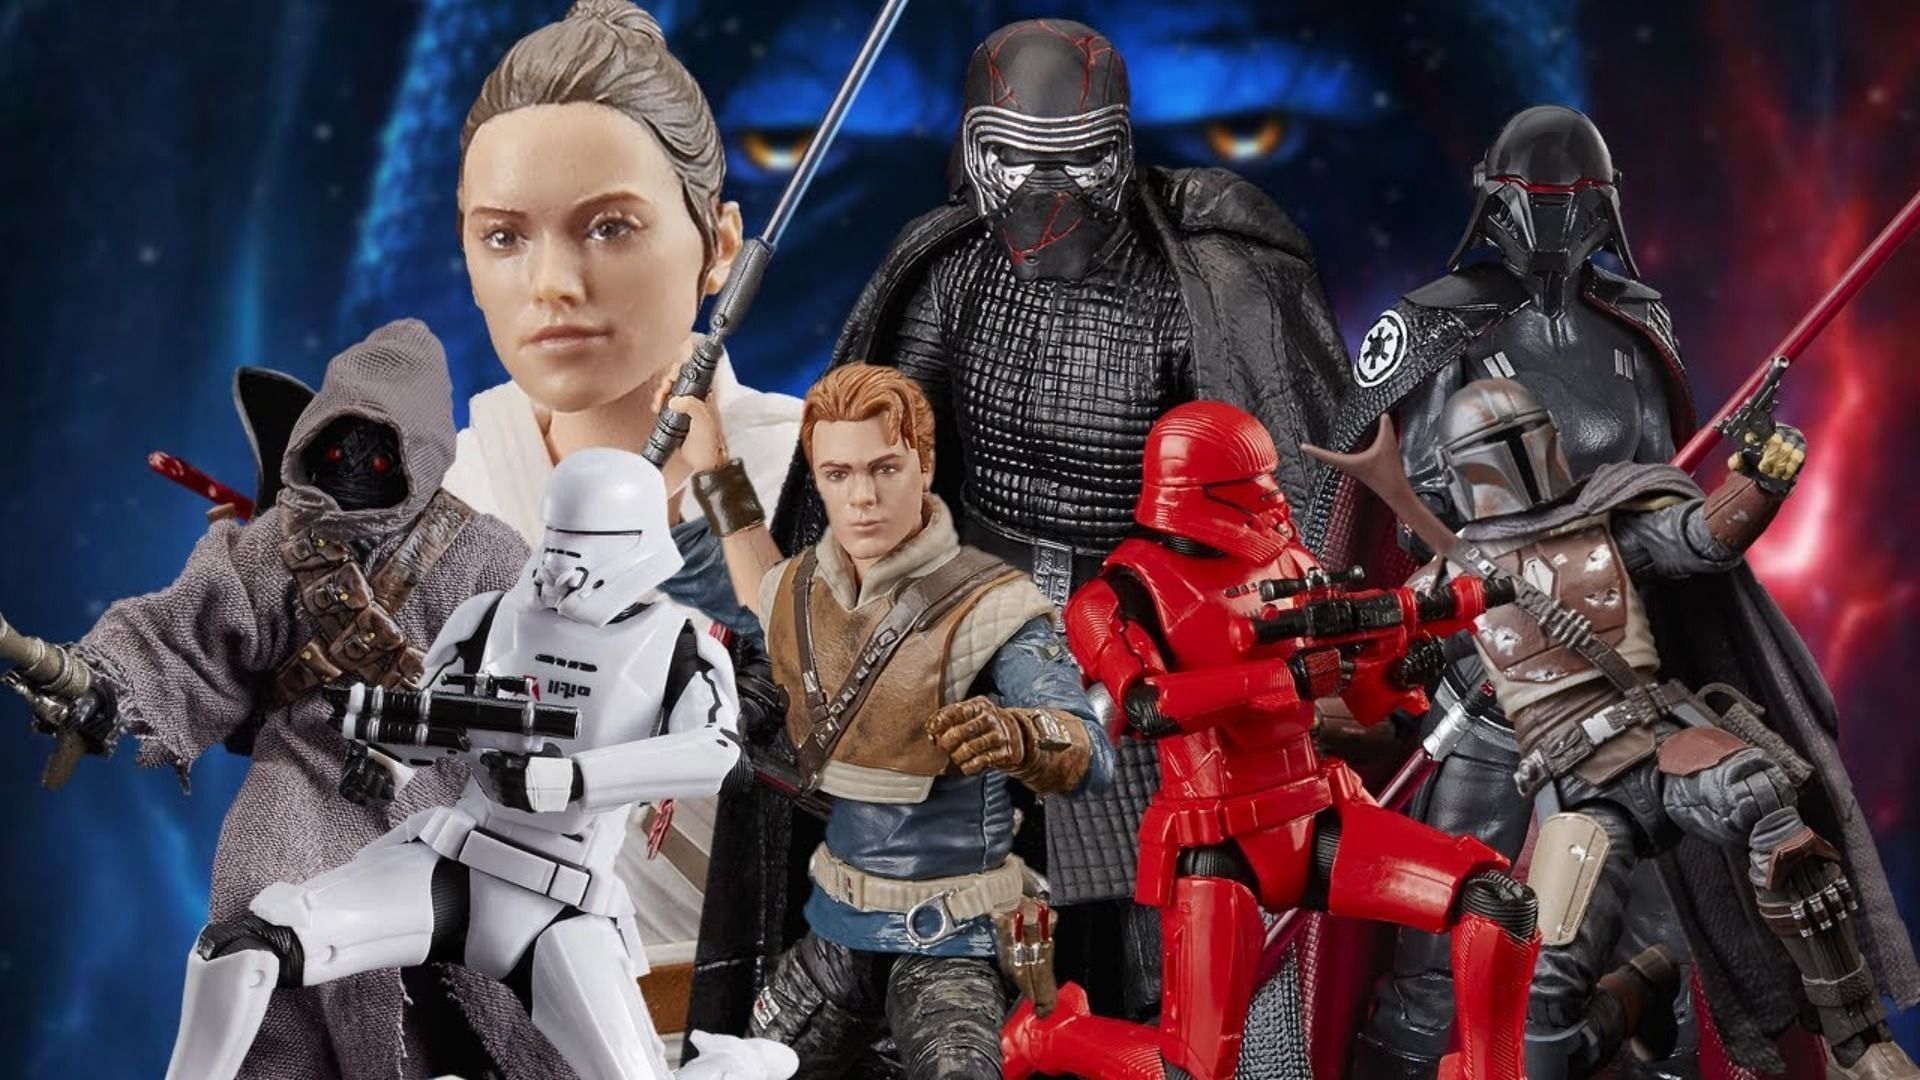 Star Wars action figures (Image via The Toy Buzz/YouTube)